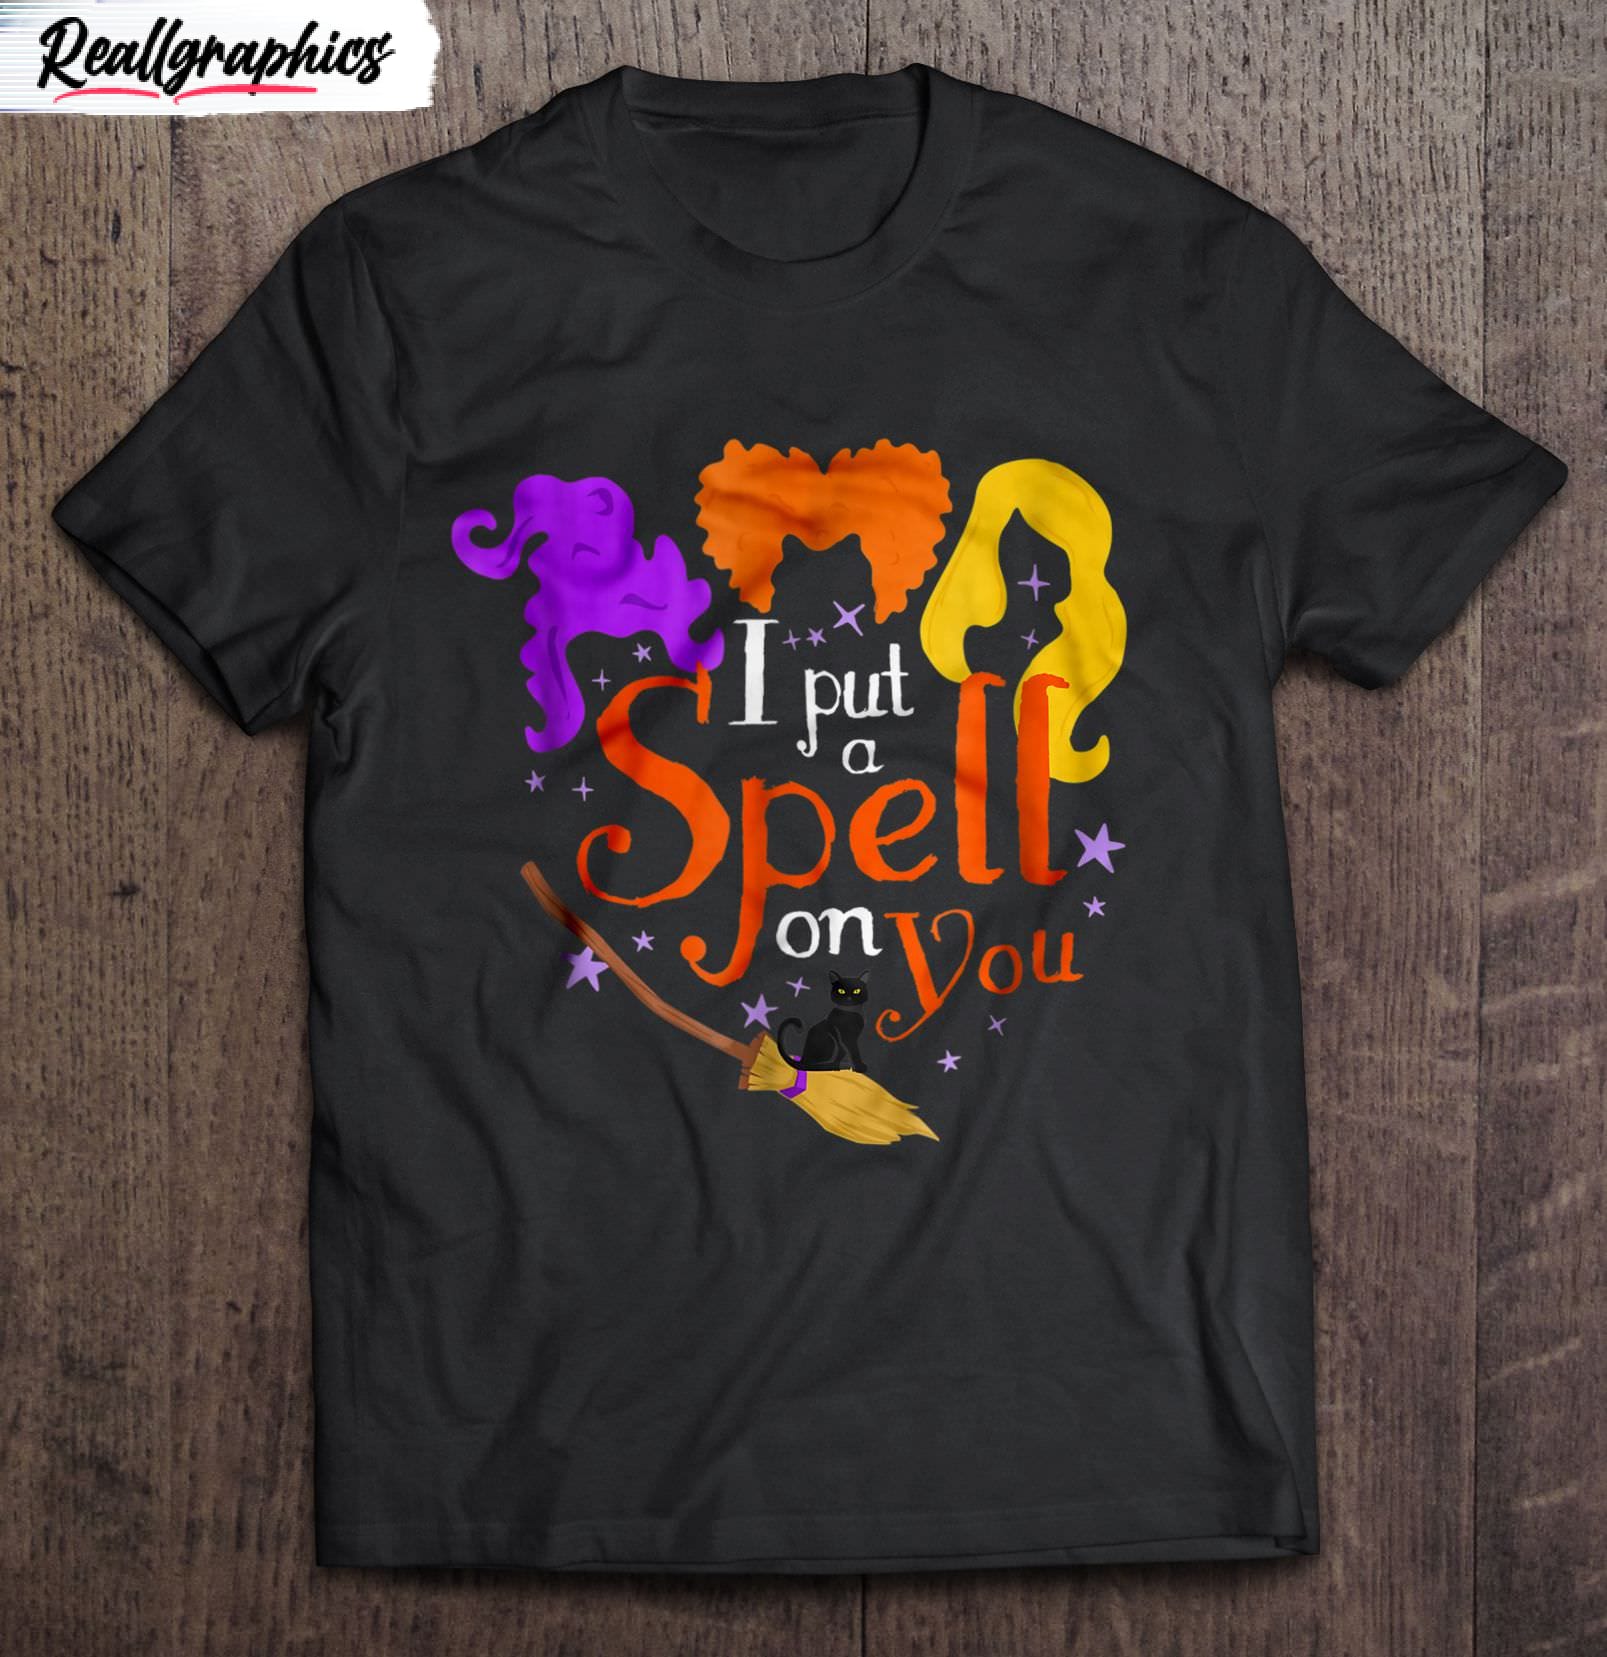 this halloween wear my witchy charm : i put a spell on you hocus pocus shirt.